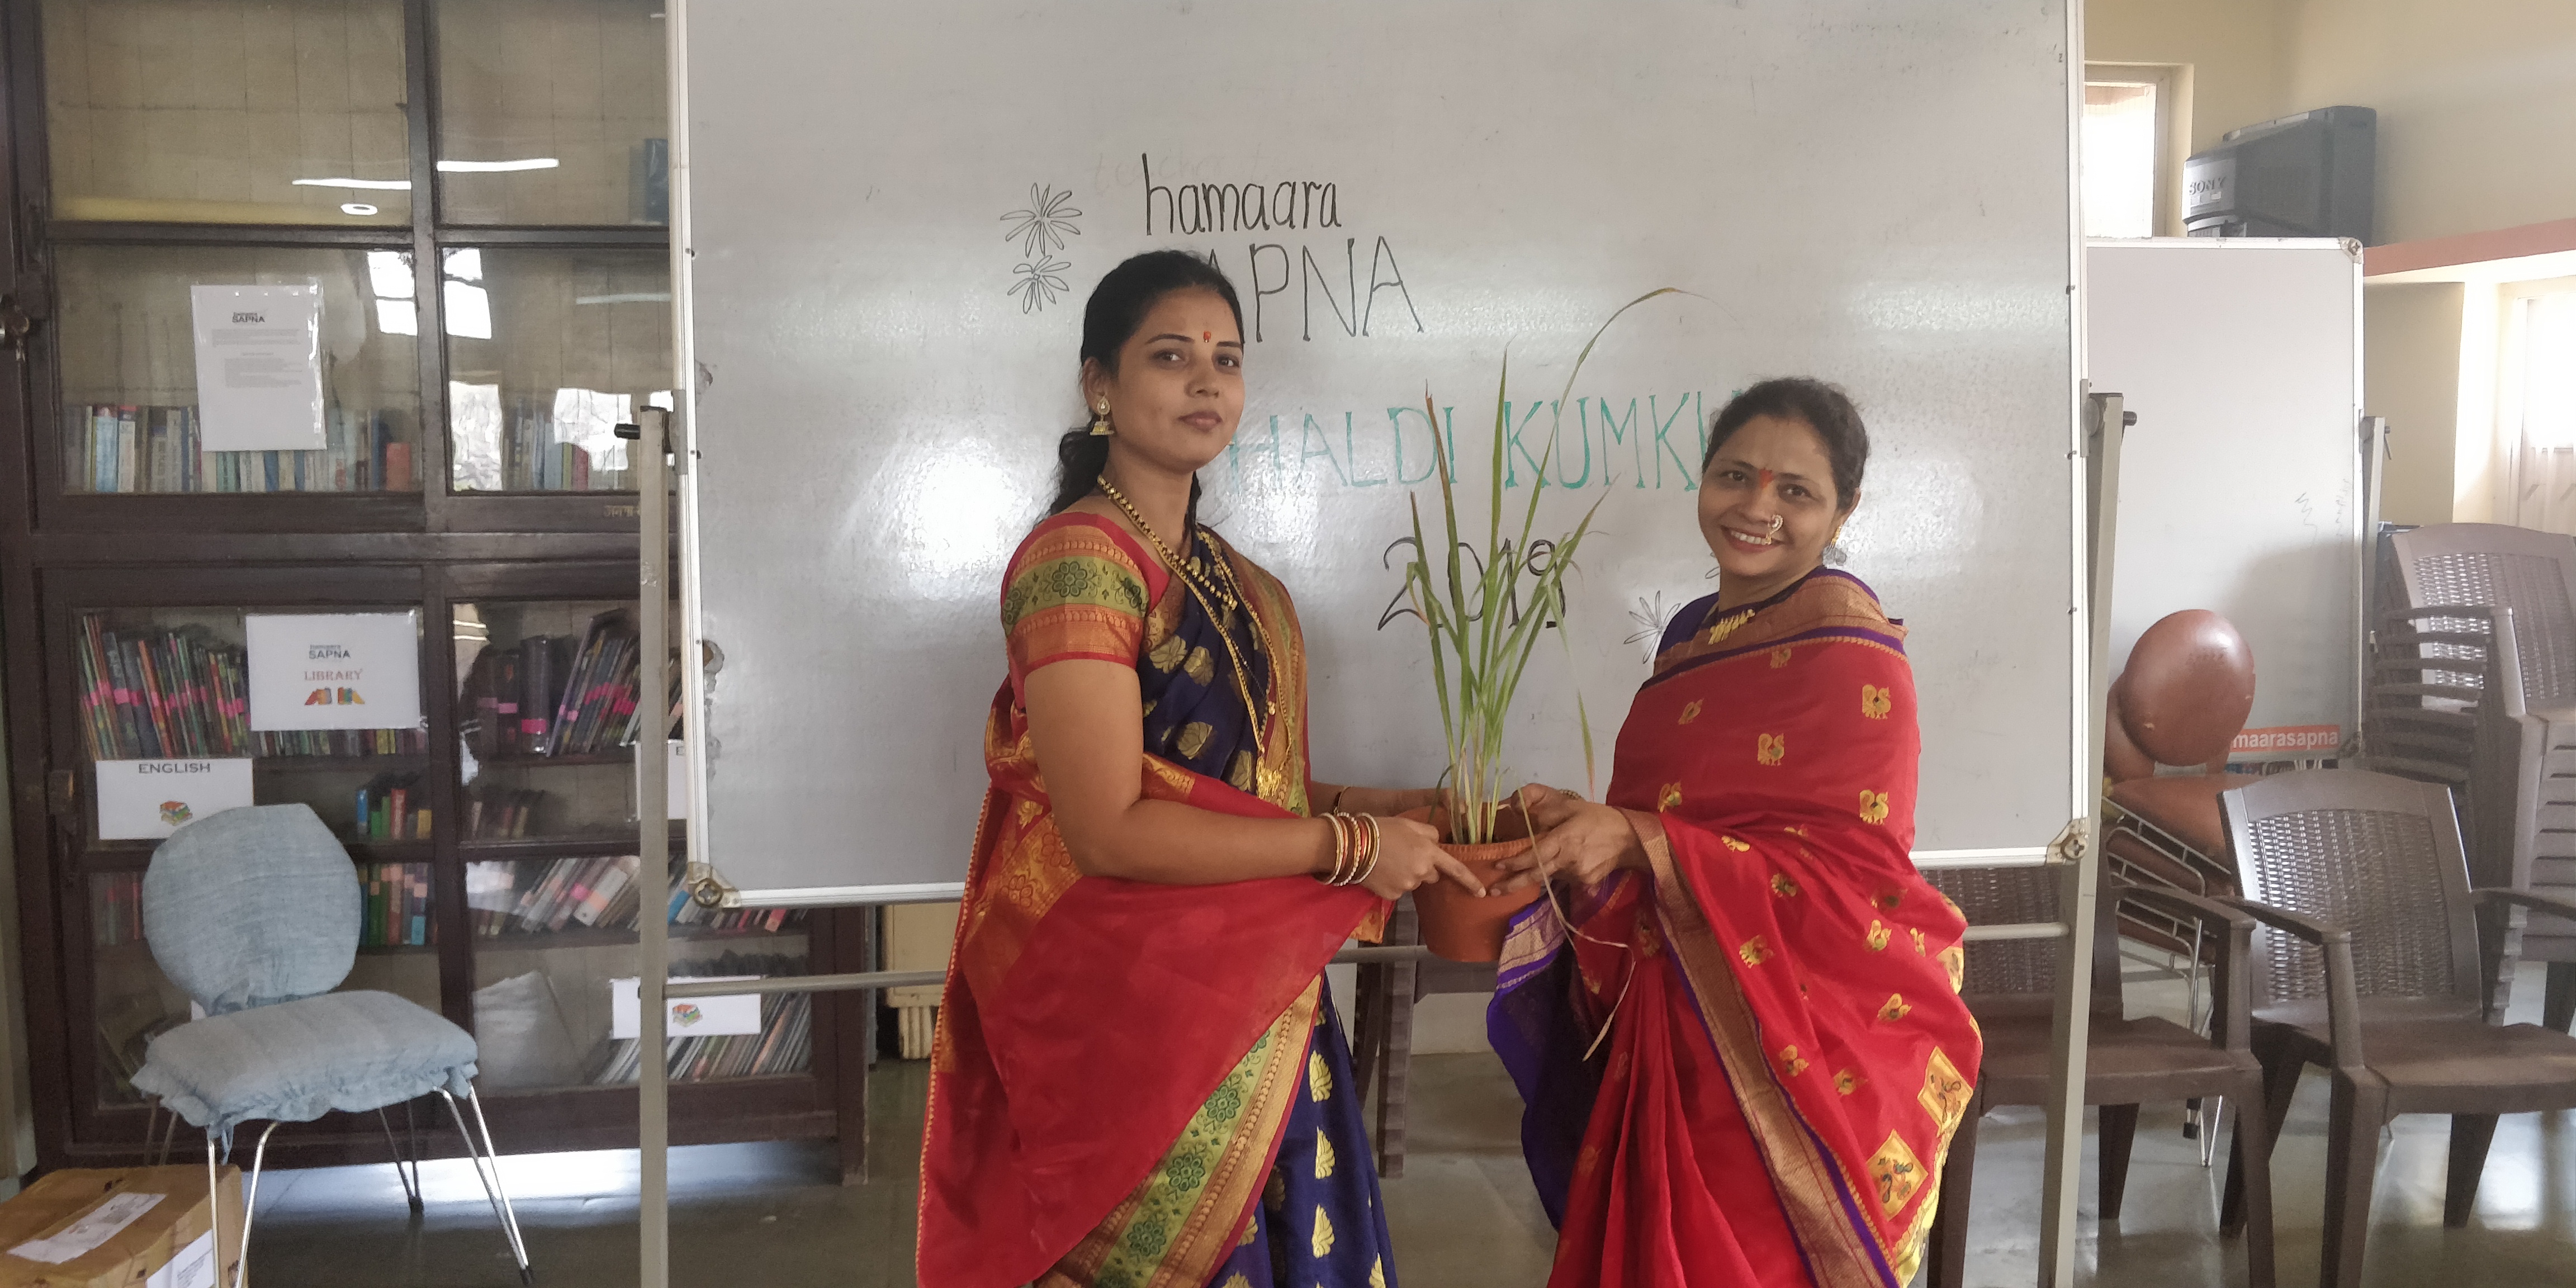 Felicitating the Project Director with a Lemongrass potted plant too
